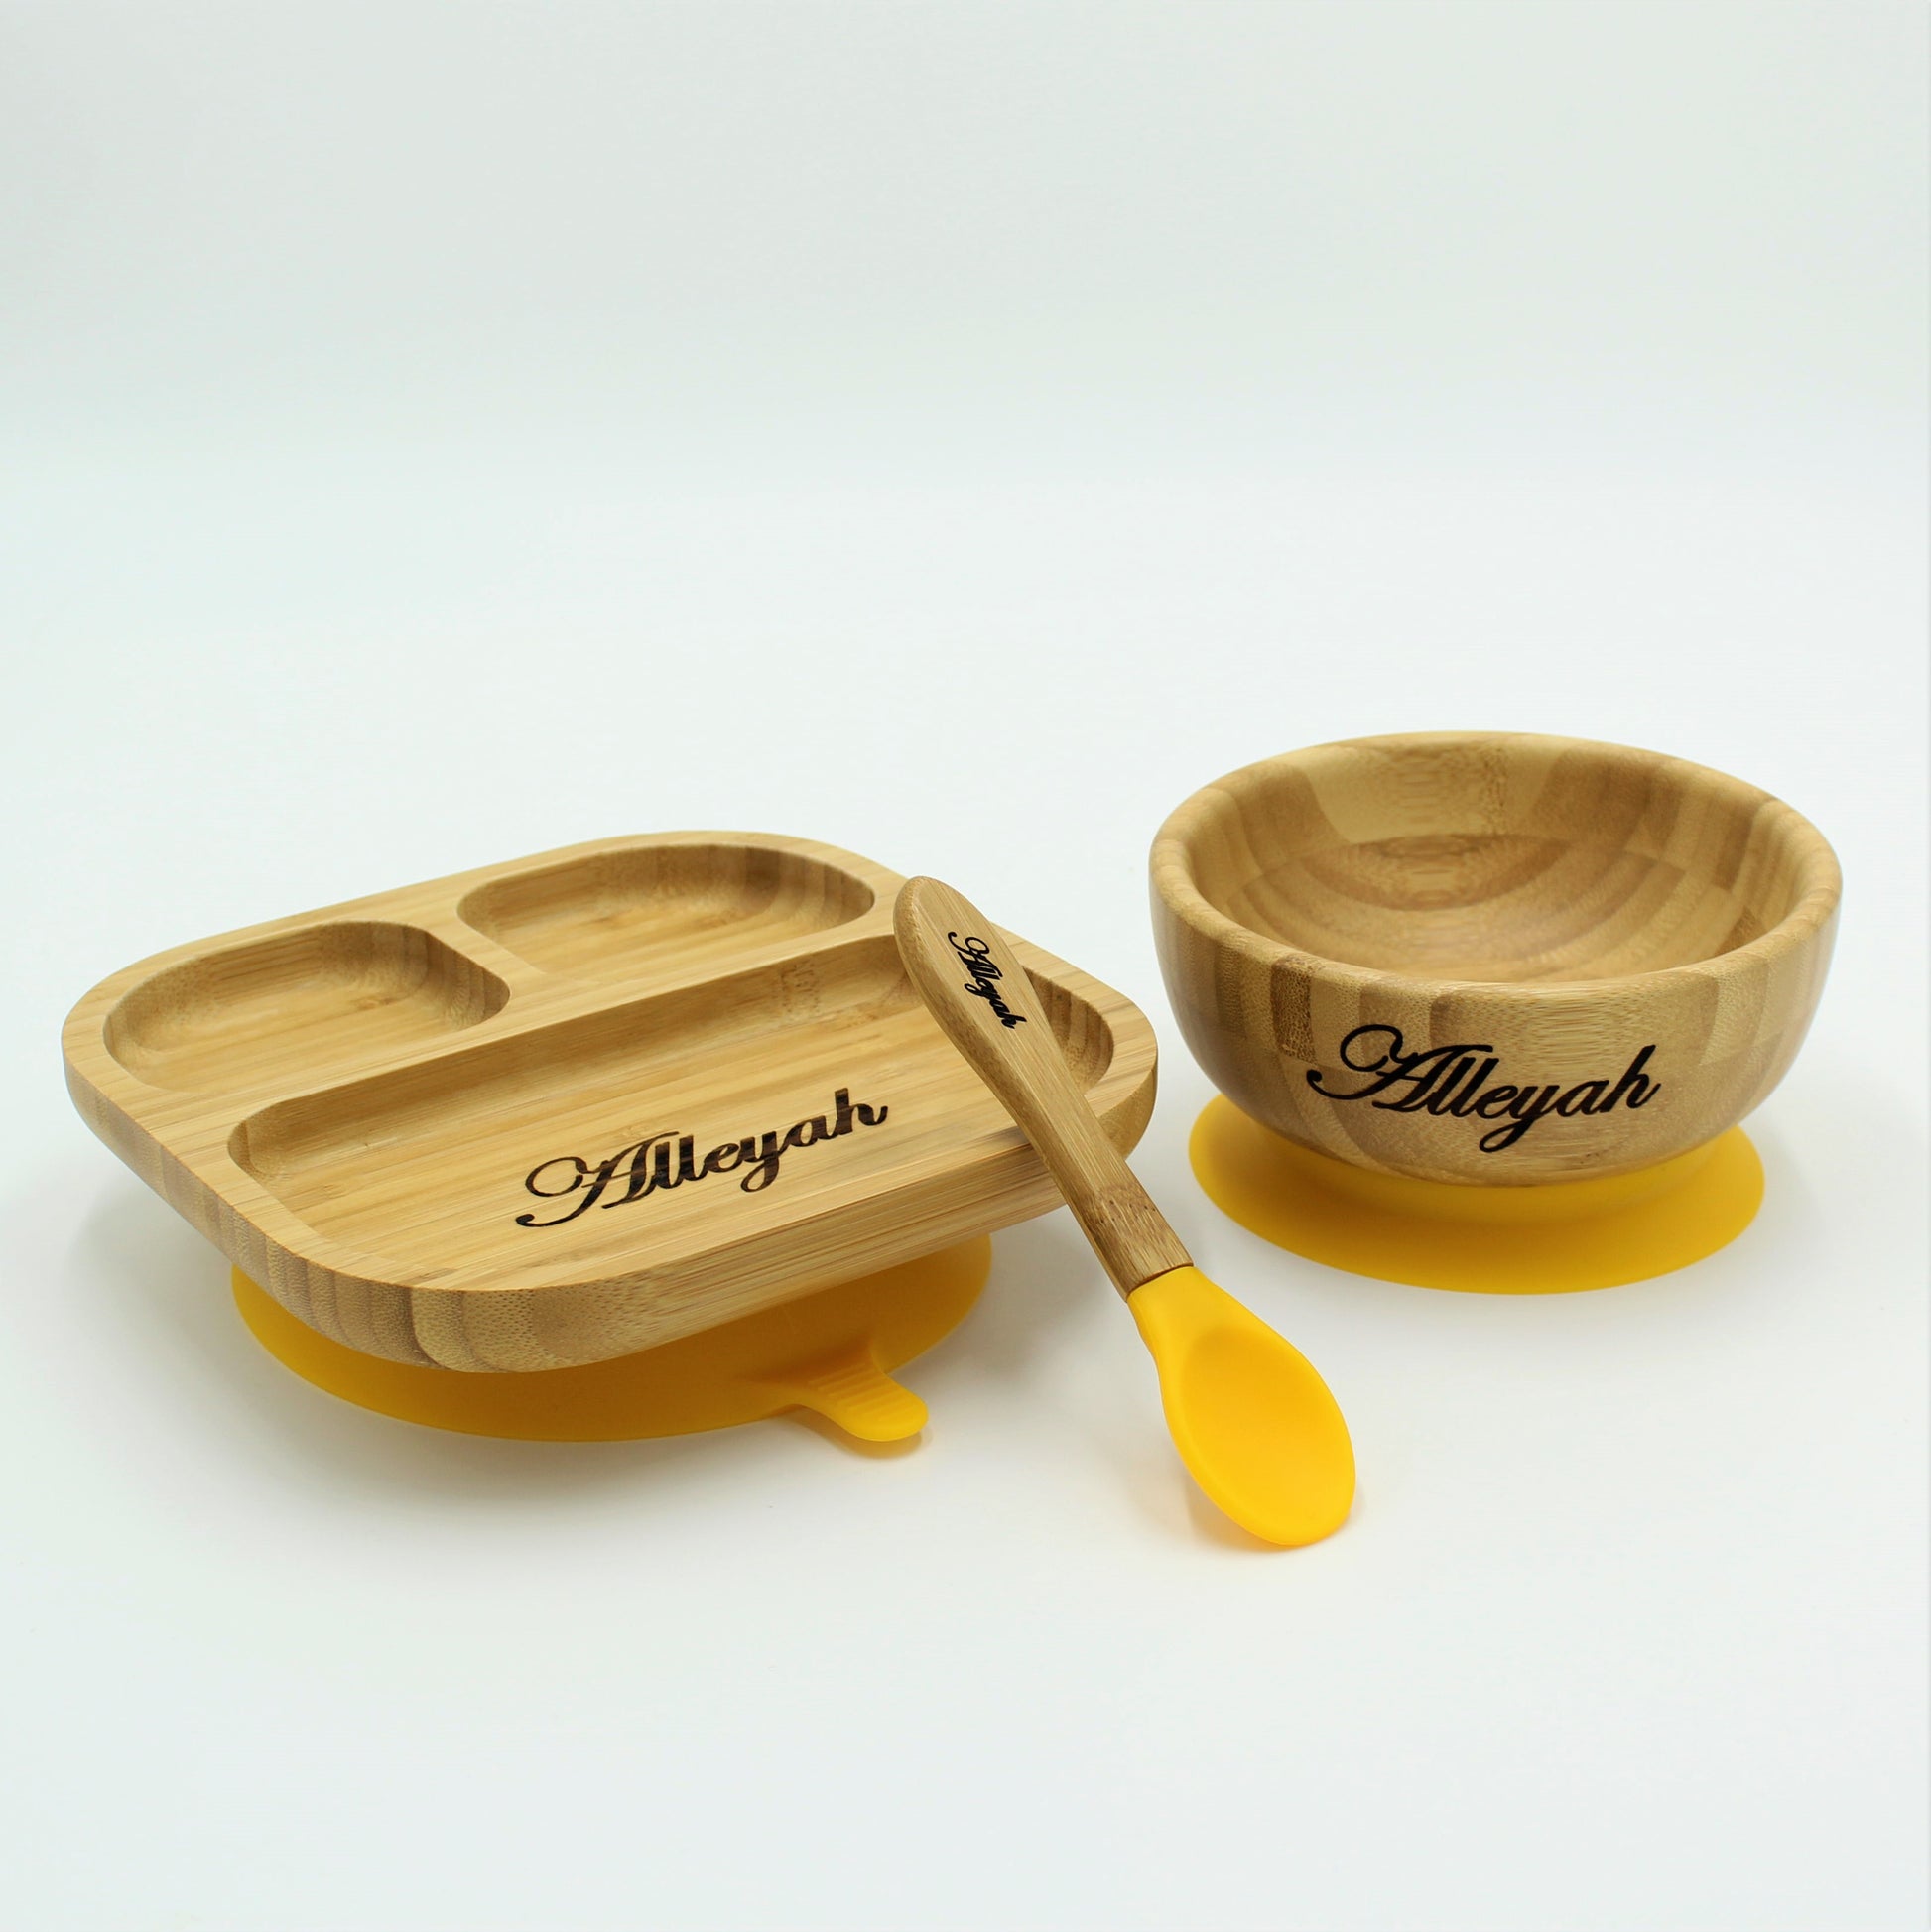 Personalised Wooden Tiny Dining Bamboo Plate, Bowl, and Spoon Set - Yellow | Babba box.